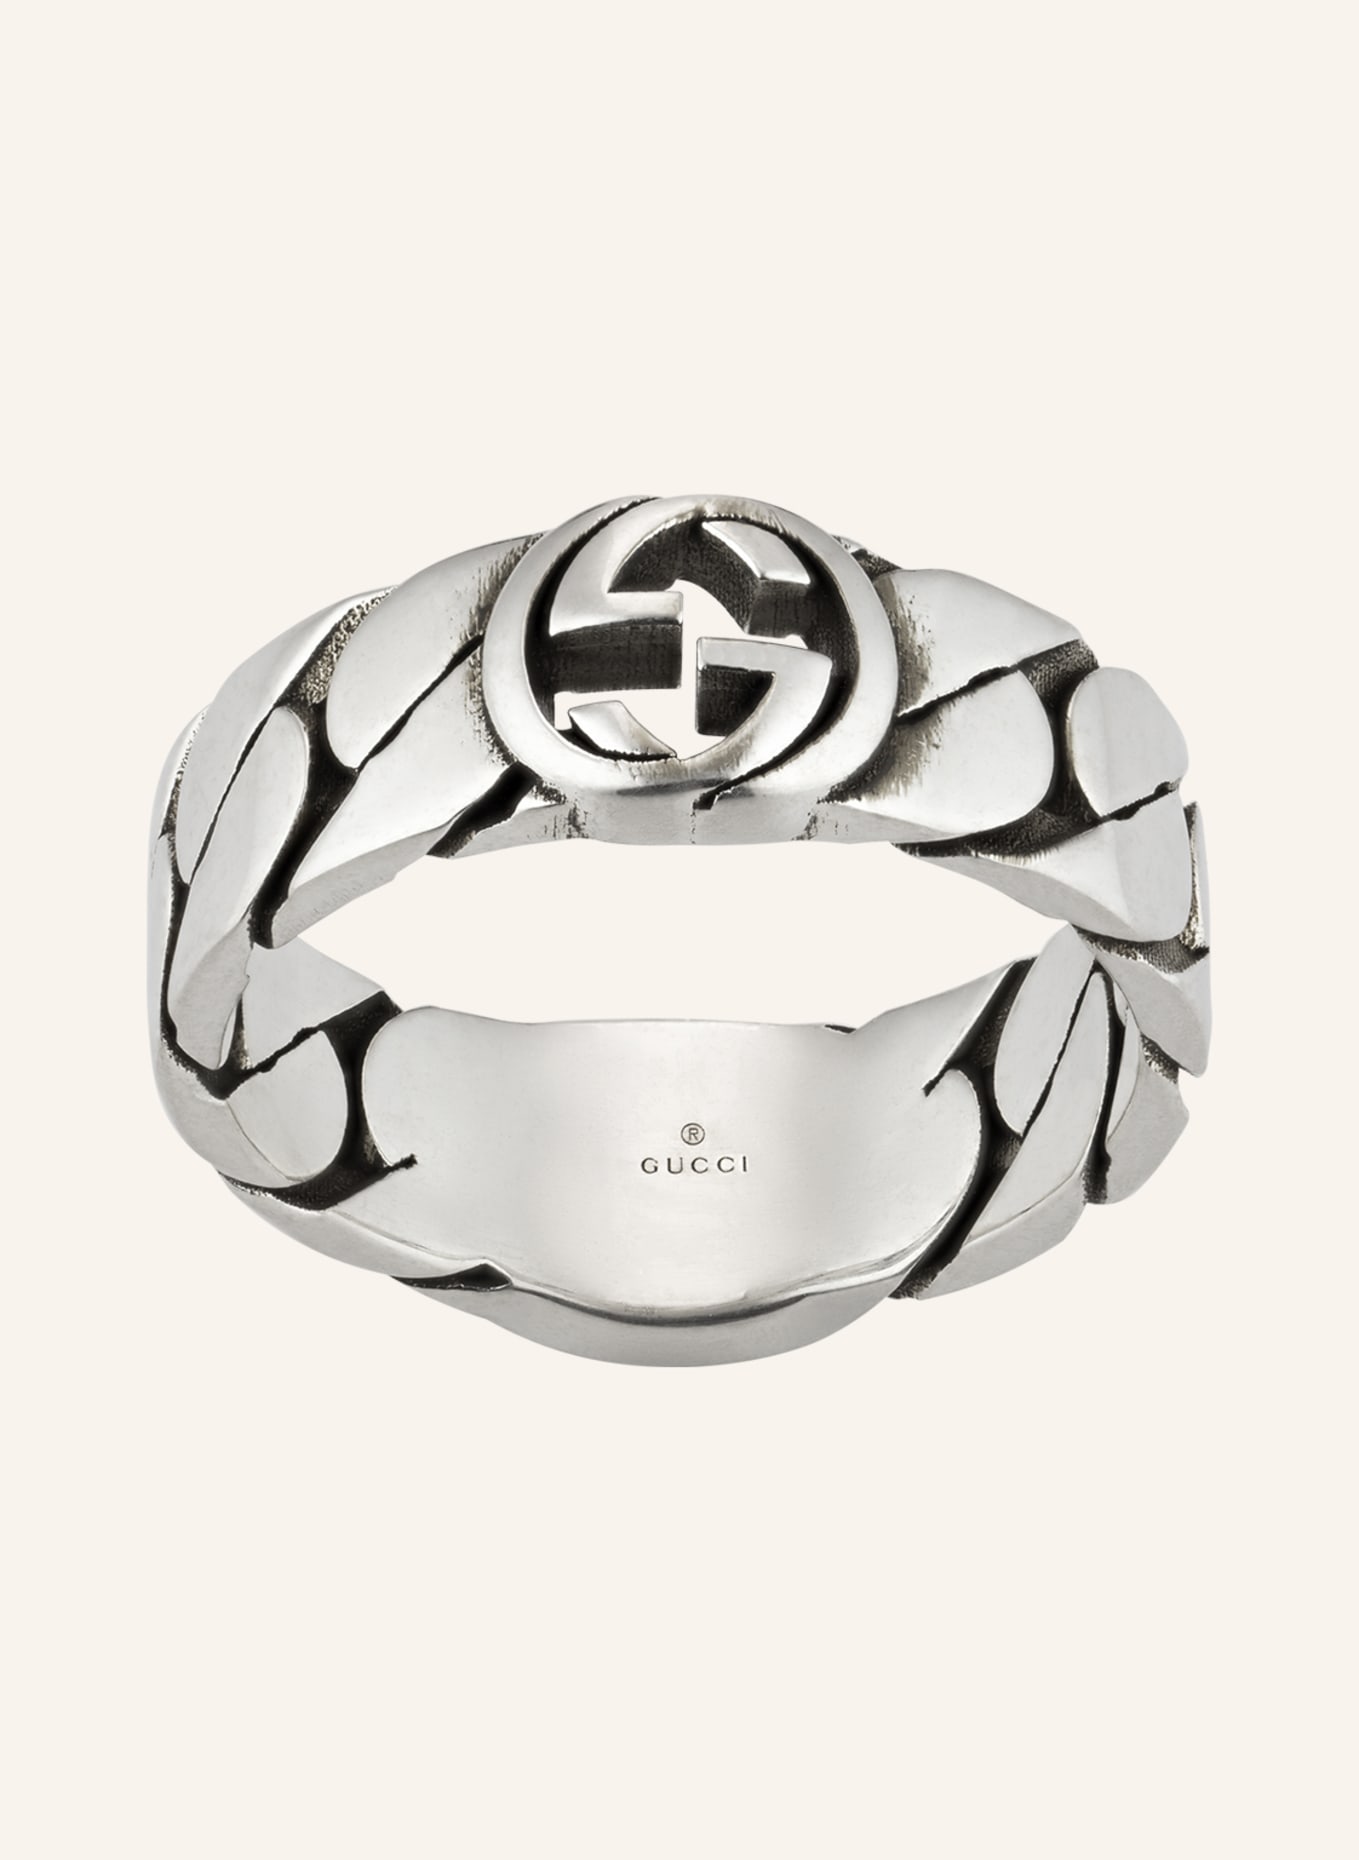 Gucci Interlocking gourmette chain ring in yellow gold-toned metal | GUCCI®  US